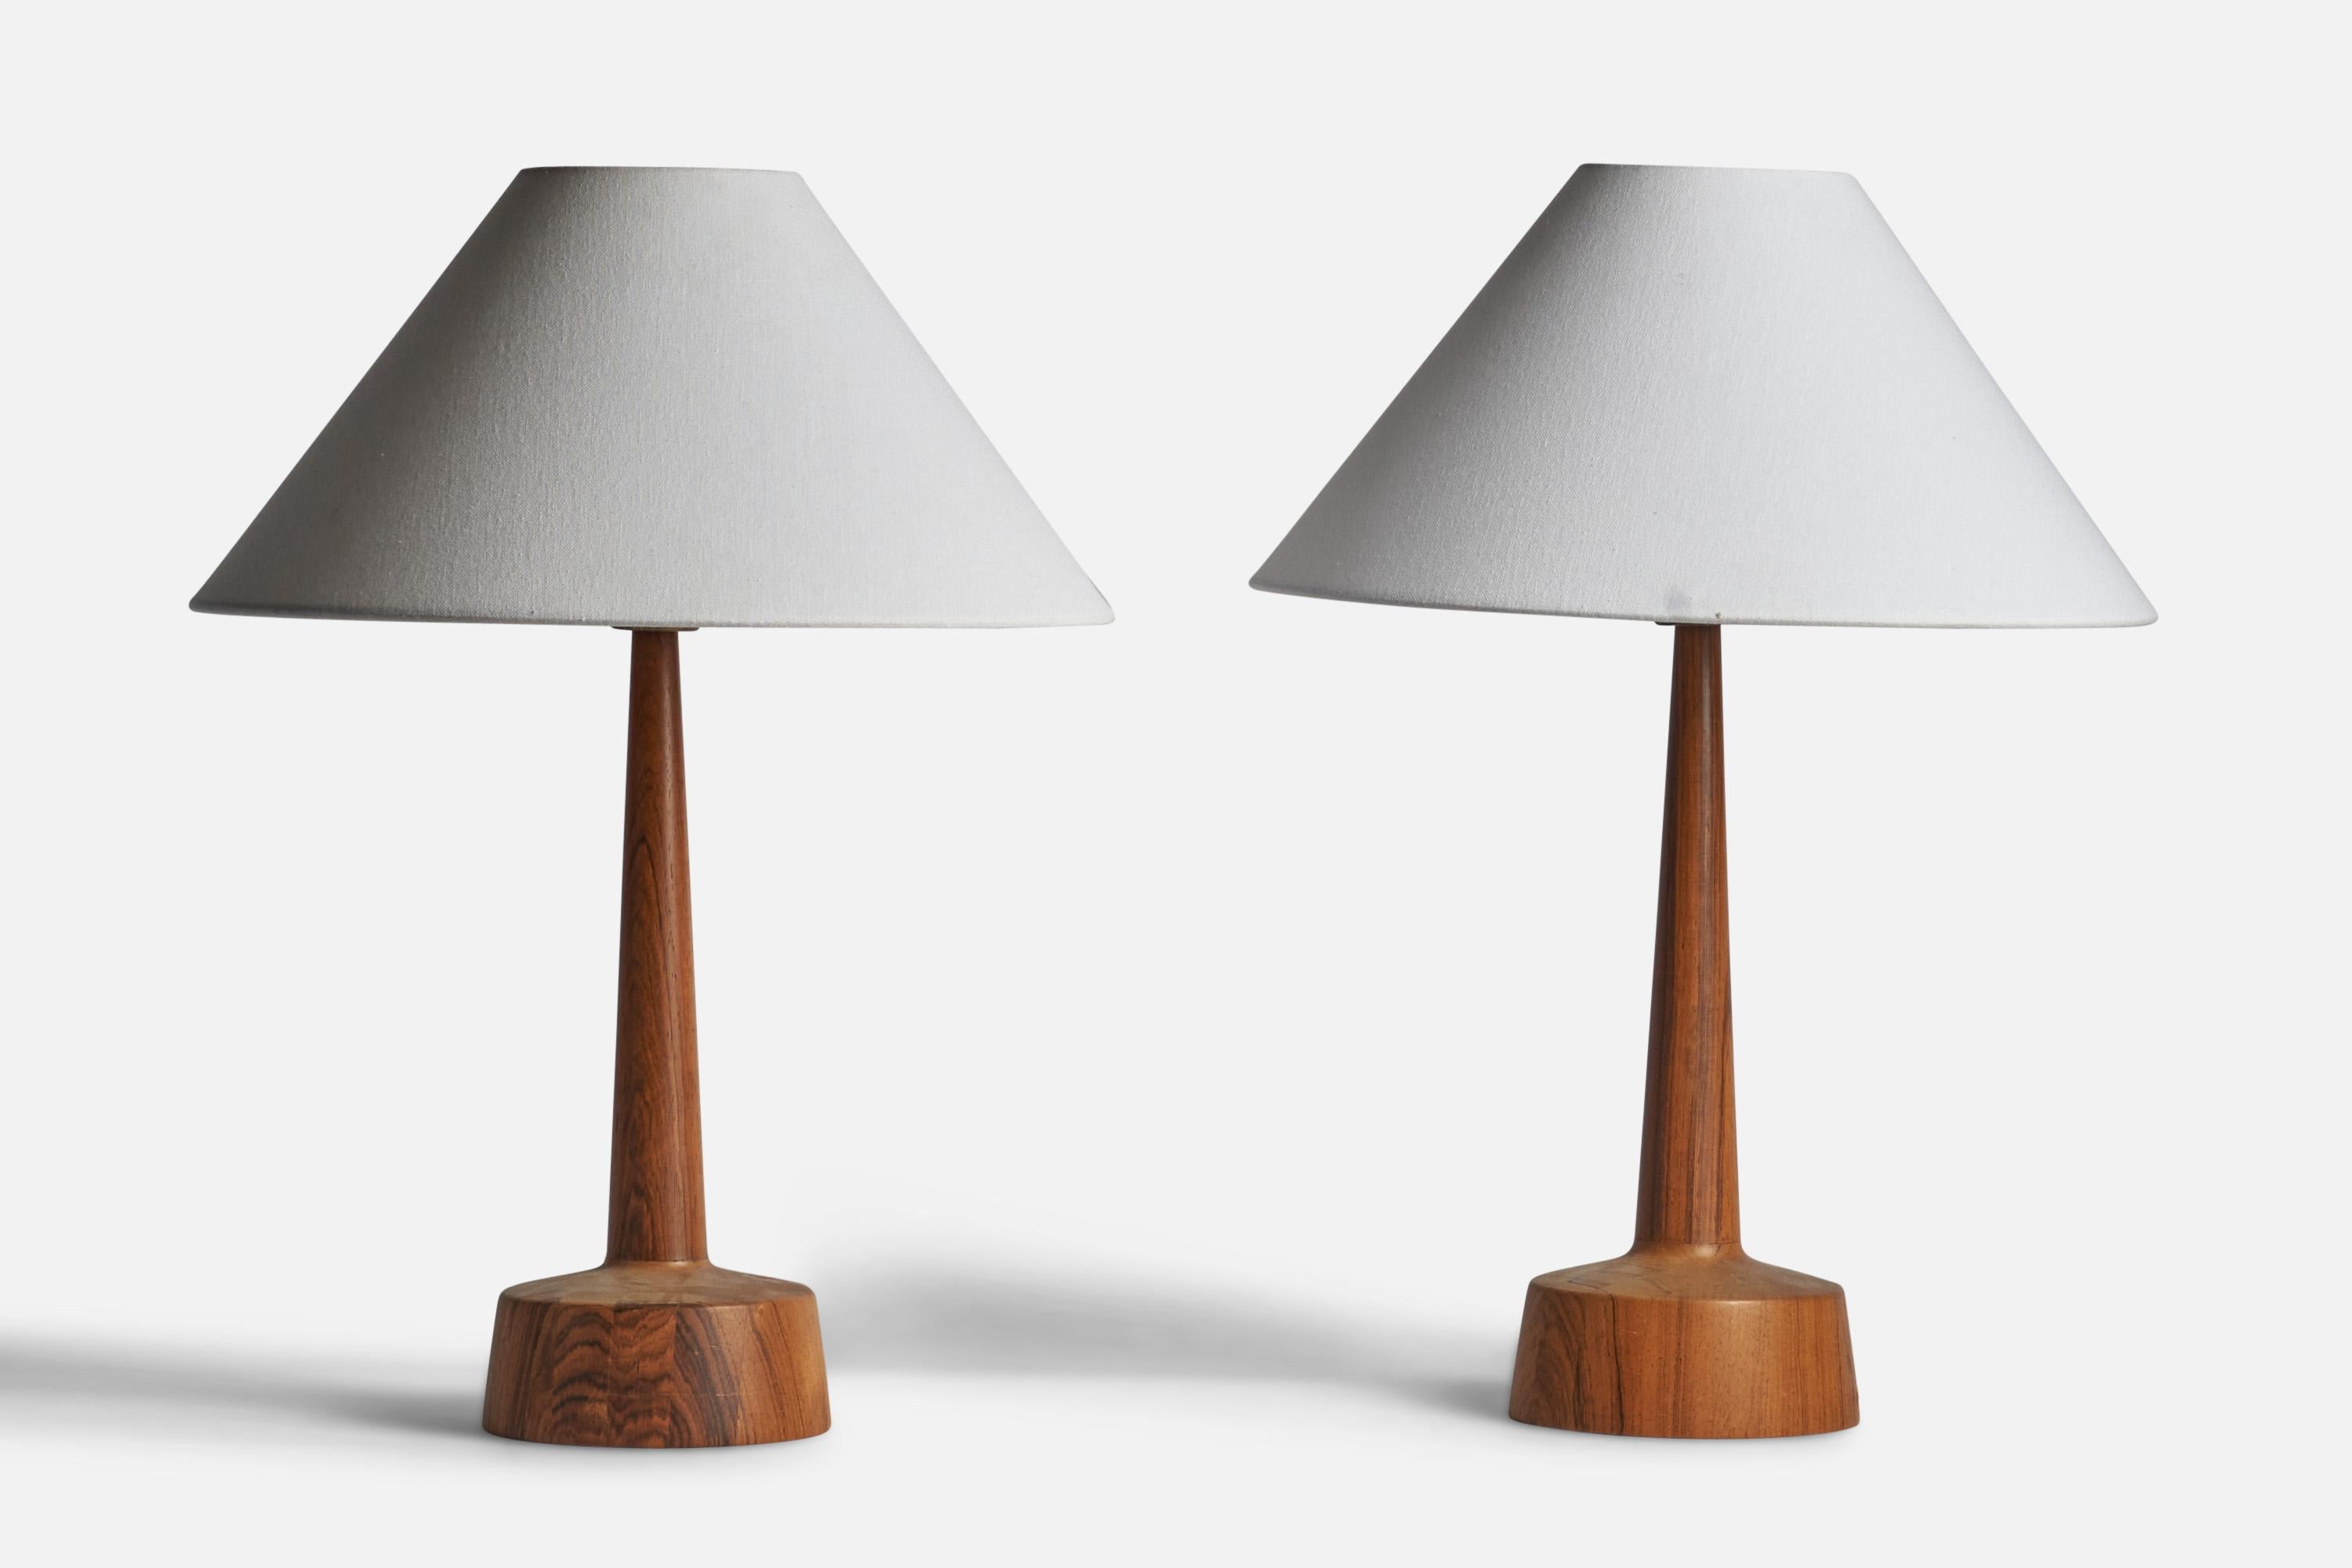 A pair of rosewood table lamps designed and produced by Stilarmatur Tranås, Sweden, 1960s.

Dimensions of Lamp (inches): 17” H x 6.15” Diameter
Dimensions of Shade (inches): 4.5” Top Diameter x 16” Bottom Diameter x 7.75” H 
Dimensions of Lamp with